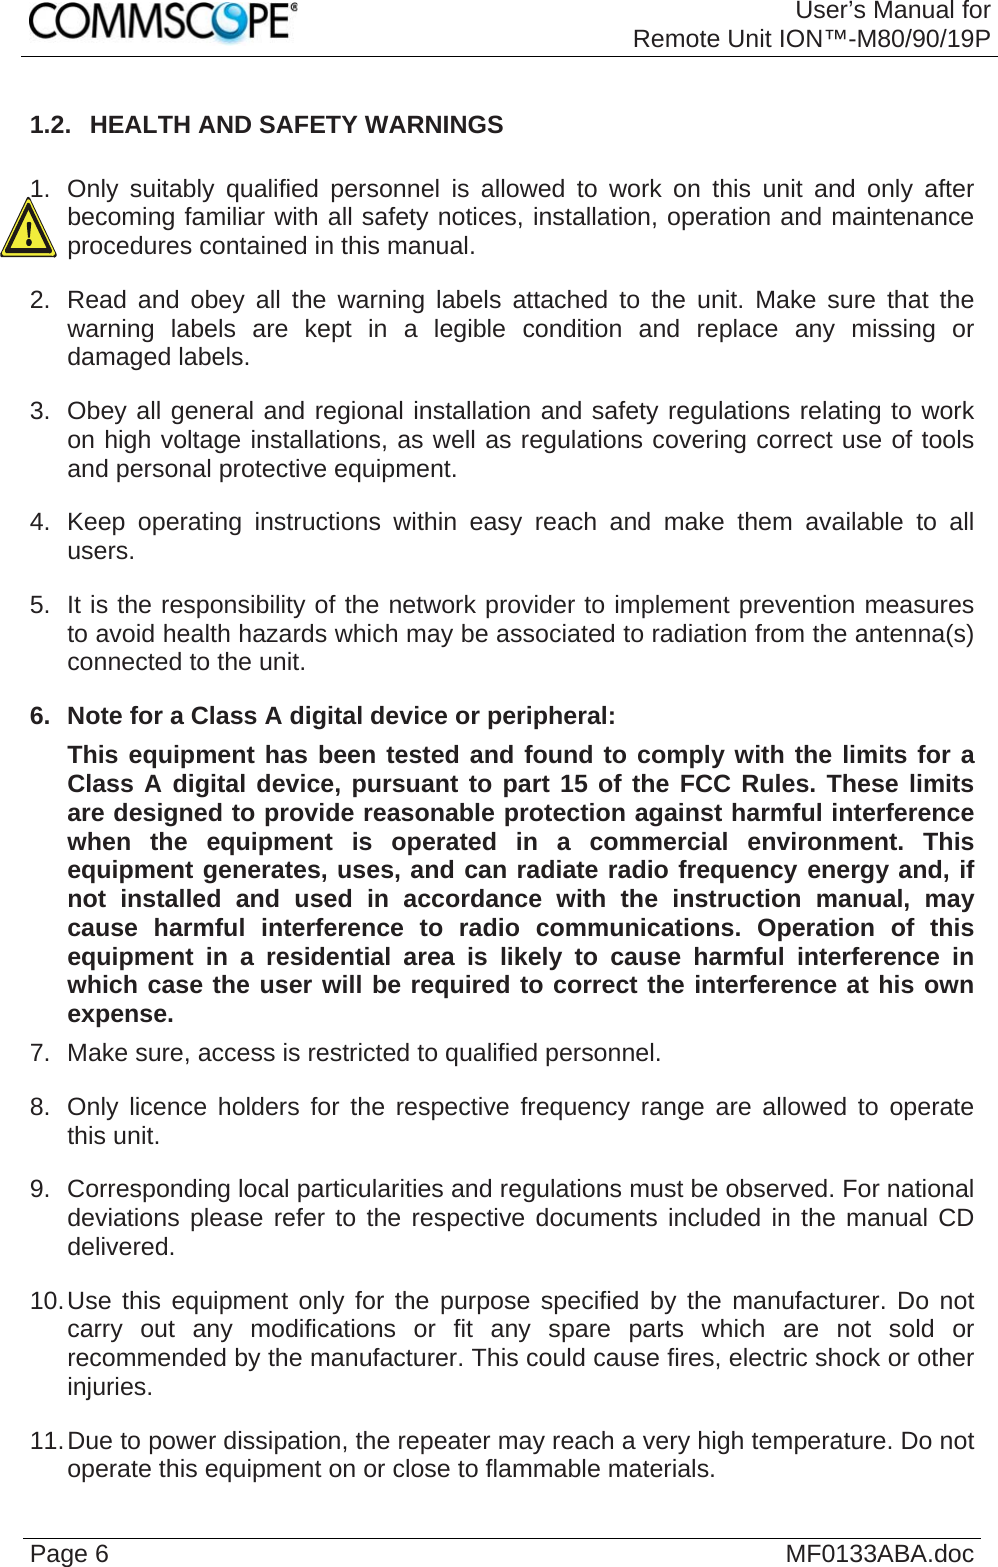 User’s Manual forRemote Unit ION™-M80/90/19P Page 6  MF0133ABA.doc1.2.  HEALTH AND SAFETY WARNINGS  1.  Only suitably qualified personnel is allowed to work on this unit and only after becoming familiar with all safety notices, installation, operation and maintenance procedures contained in this manual. 2.  Read and obey all the warning labels attached to the unit. Make sure that the warning labels are kept in a legible condition and replace any missing or damaged labels. 3.  Obey all general and regional installation and safety regulations relating to work on high voltage installations, as well as regulations covering correct use of tools and personal protective equipment. 4.  Keep operating instructions within easy reach and make them available to all users. 5.  It is the responsibility of the network provider to implement prevention measures to avoid health hazards which may be associated to radiation from the antenna(s) connected to the unit. 6.  Note for a Class A digital device or peripheral: This equipment has been tested and found to comply with the limits for a Class A digital device, pursuant to part 15 of the FCC Rules. These limits are designed to provide reasonable protection against harmful interference when the equipment is operated in a commercial environment. This equipment generates, uses, and can radiate radio frequency energy and, if not installed and used in accordance with the instruction manual, may cause harmful interference to radio communications. Operation of this equipment in a residential area is likely to cause harmful interference in which case the user will be required to correct the interference at his own expense. 7.  Make sure, access is restricted to qualified personnel. 8.  Only licence holders for the respective frequency range are allowed to operate this unit. 9.  Corresponding local particularities and regulations must be observed. For national deviations please refer to the respective documents included in the manual CD delivered. 10. Use this equipment only for the purpose specified by the manufacturer. Do not carry out any modifications or fit any spare parts which are not sold or recommended by the manufacturer. This could cause fires, electric shock or other injuries. 11. Due to power dissipation, the repeater may reach a very high temperature. Do not operate this equipment on or close to flammable materials.  